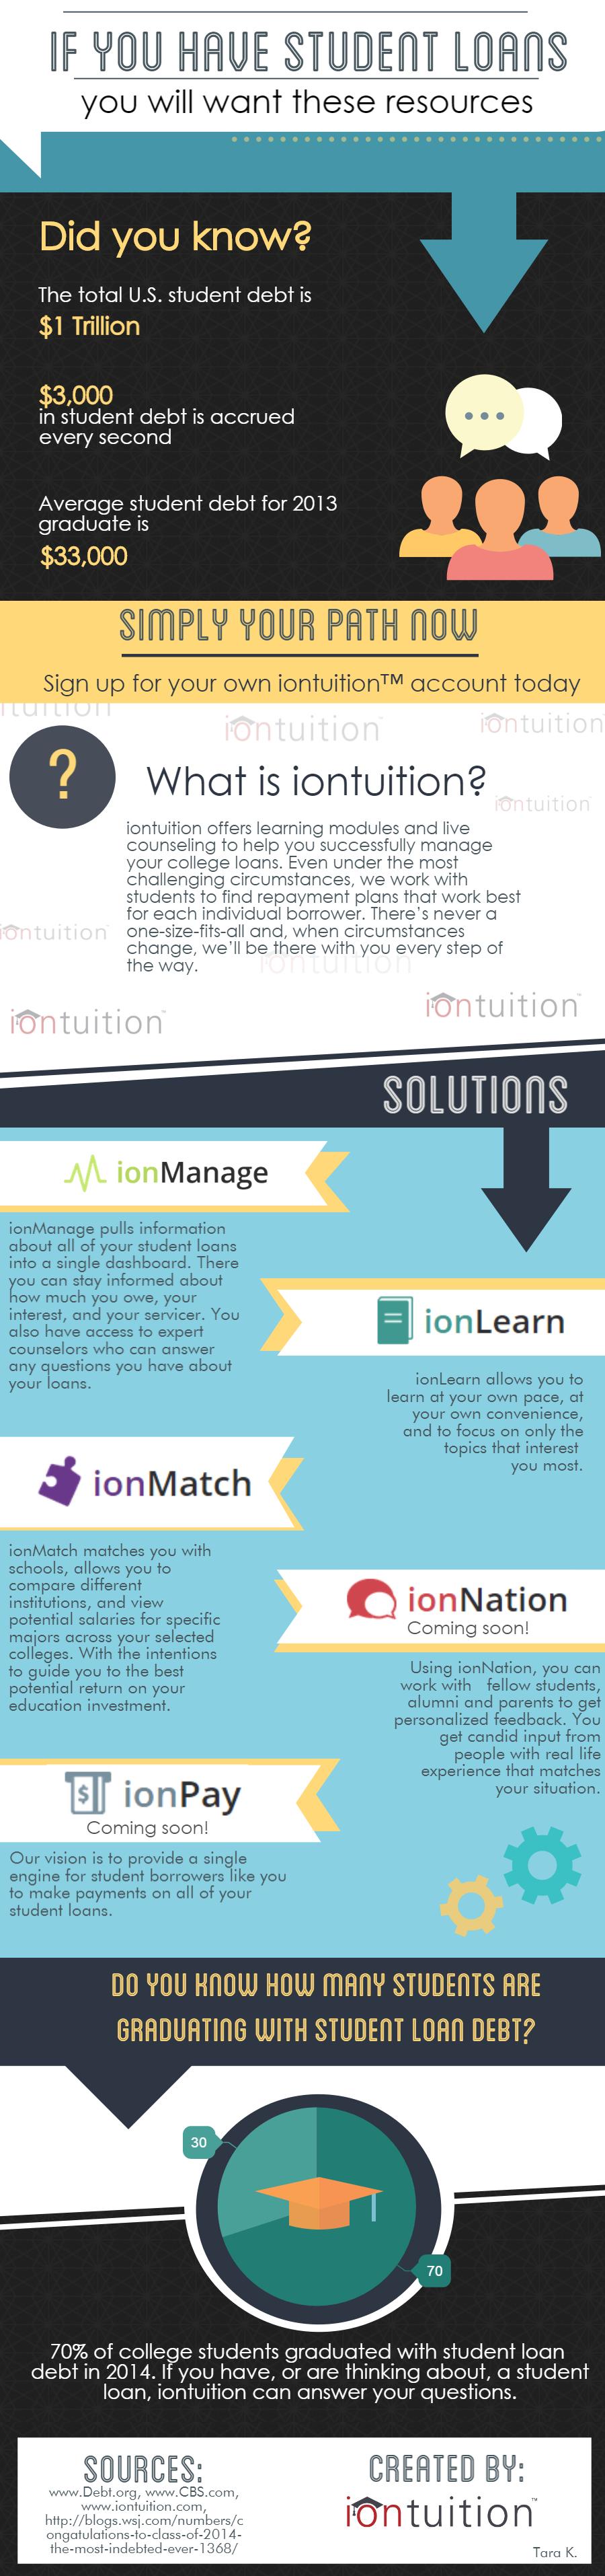 [INFOGRAPHIC] If you have student loans you will want this resource